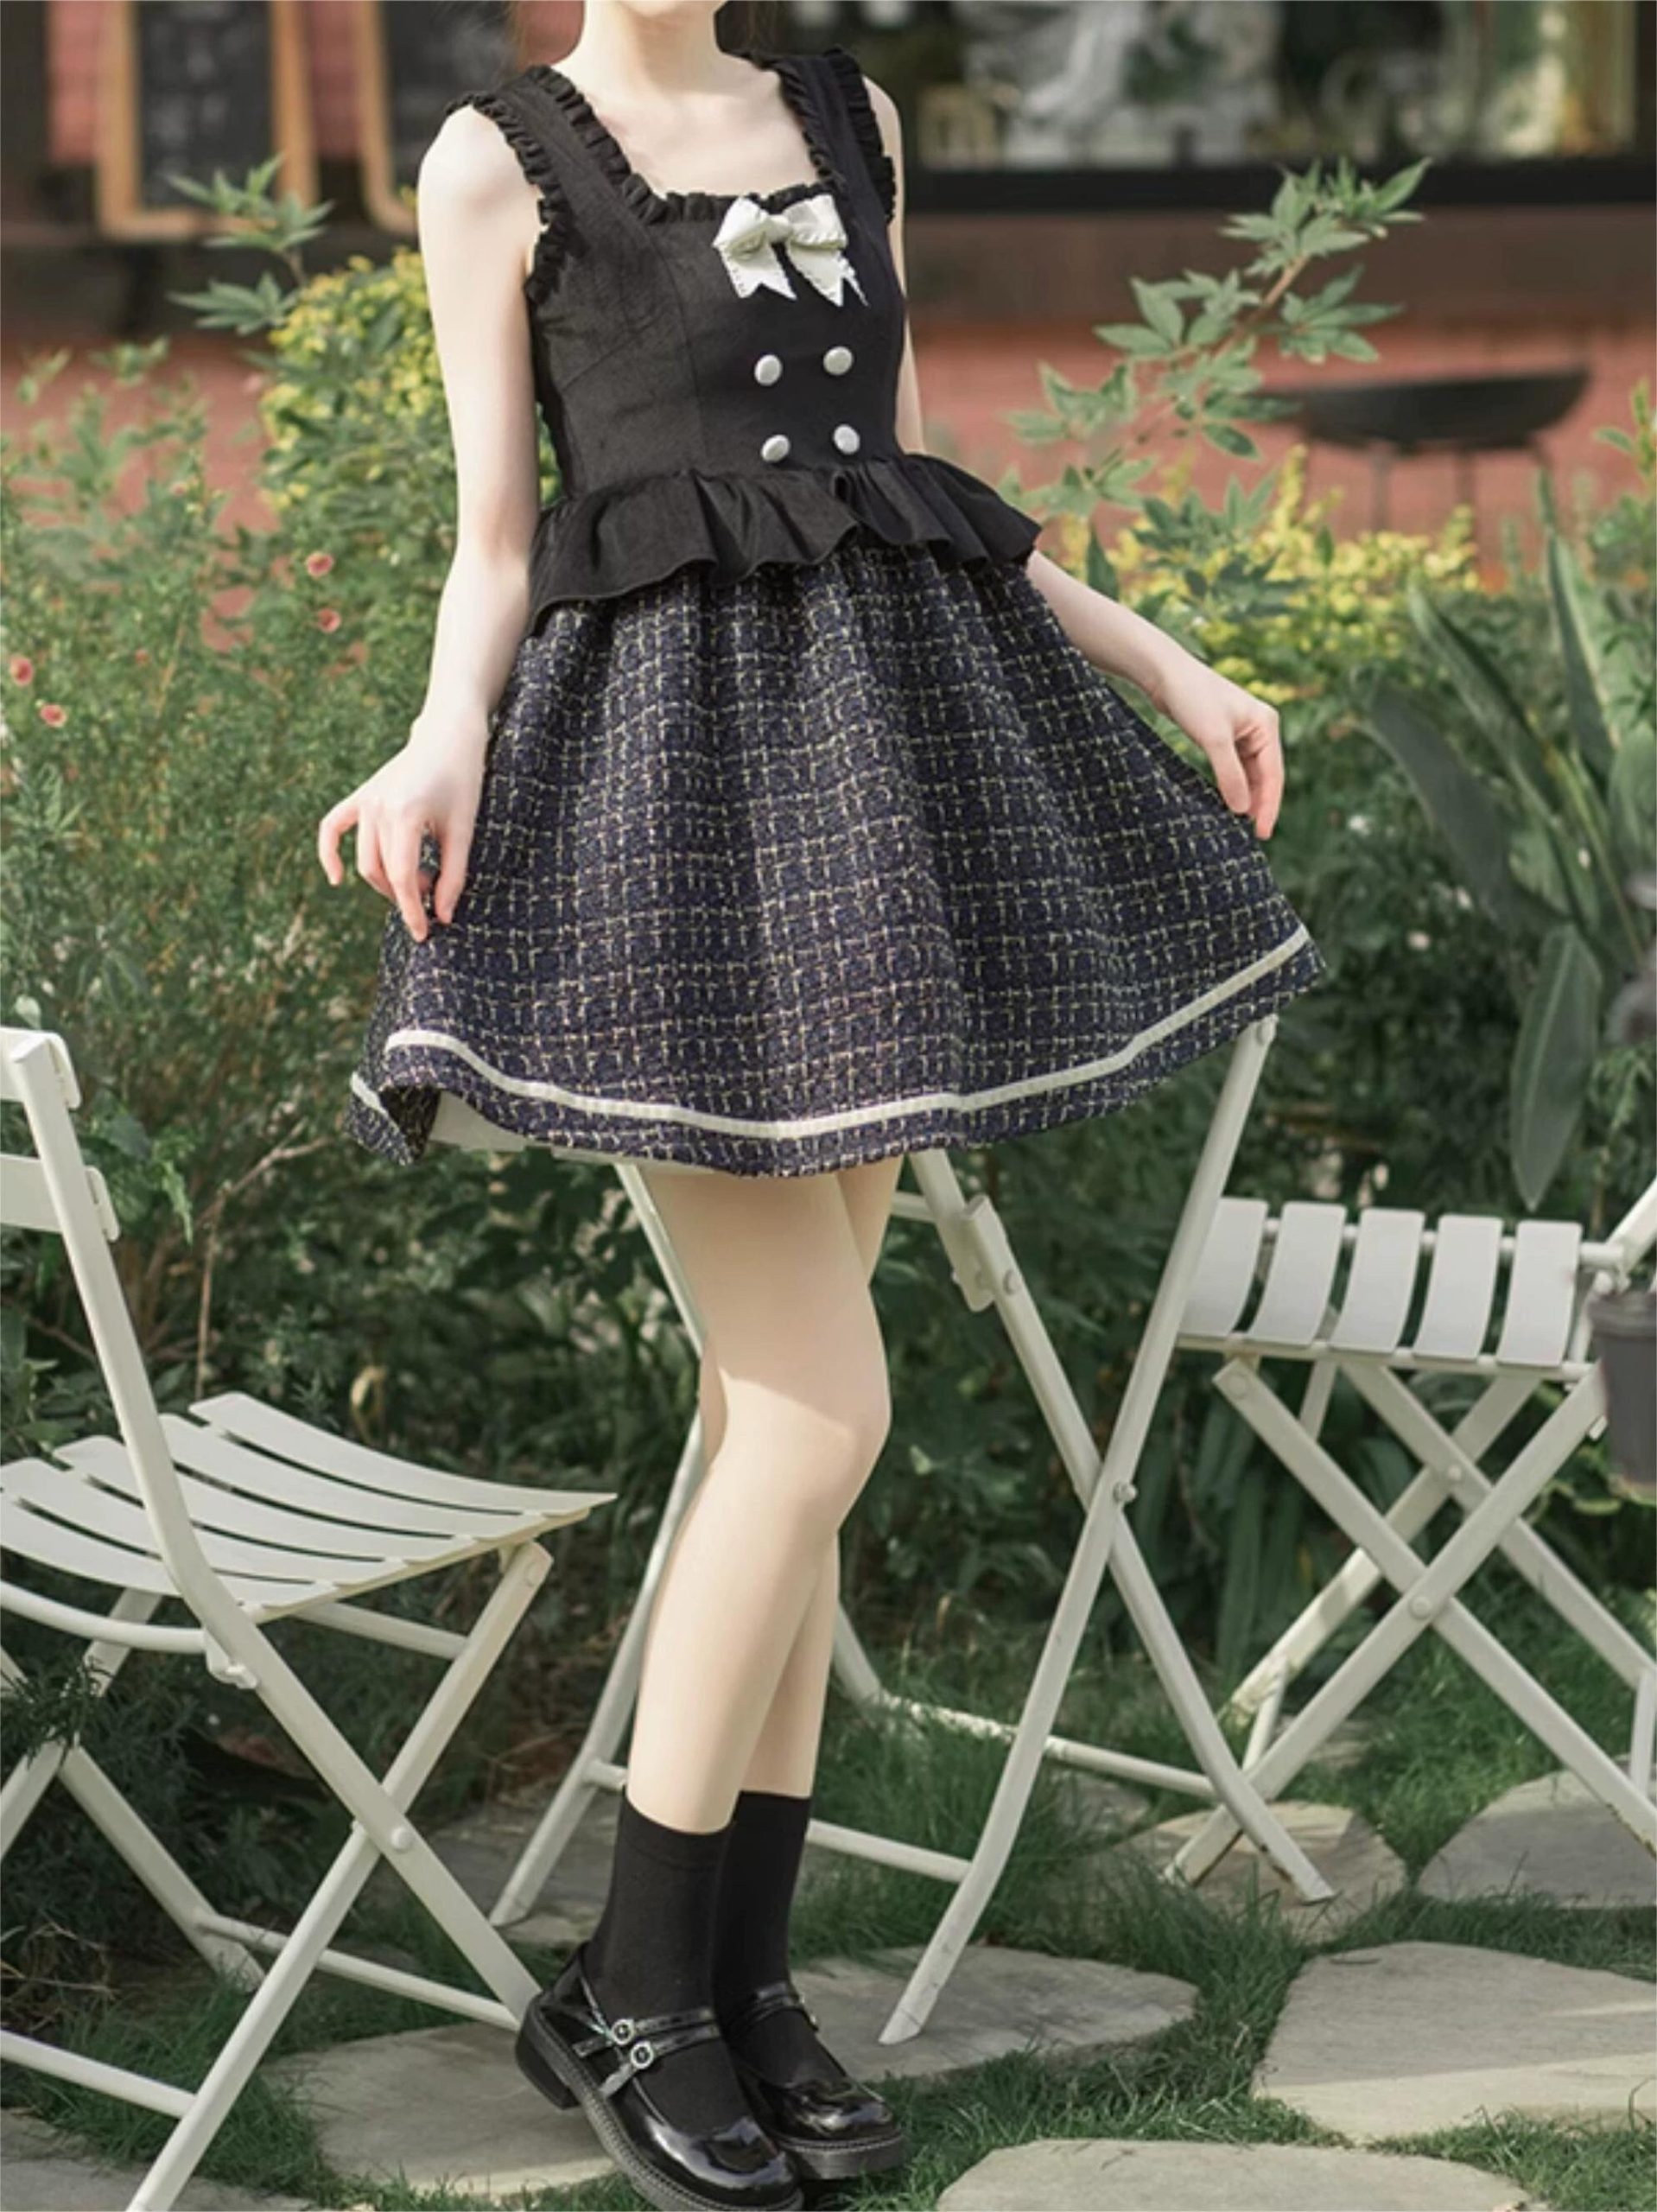 Y2K Lolita Dress with Bow Tie for Graduation Party